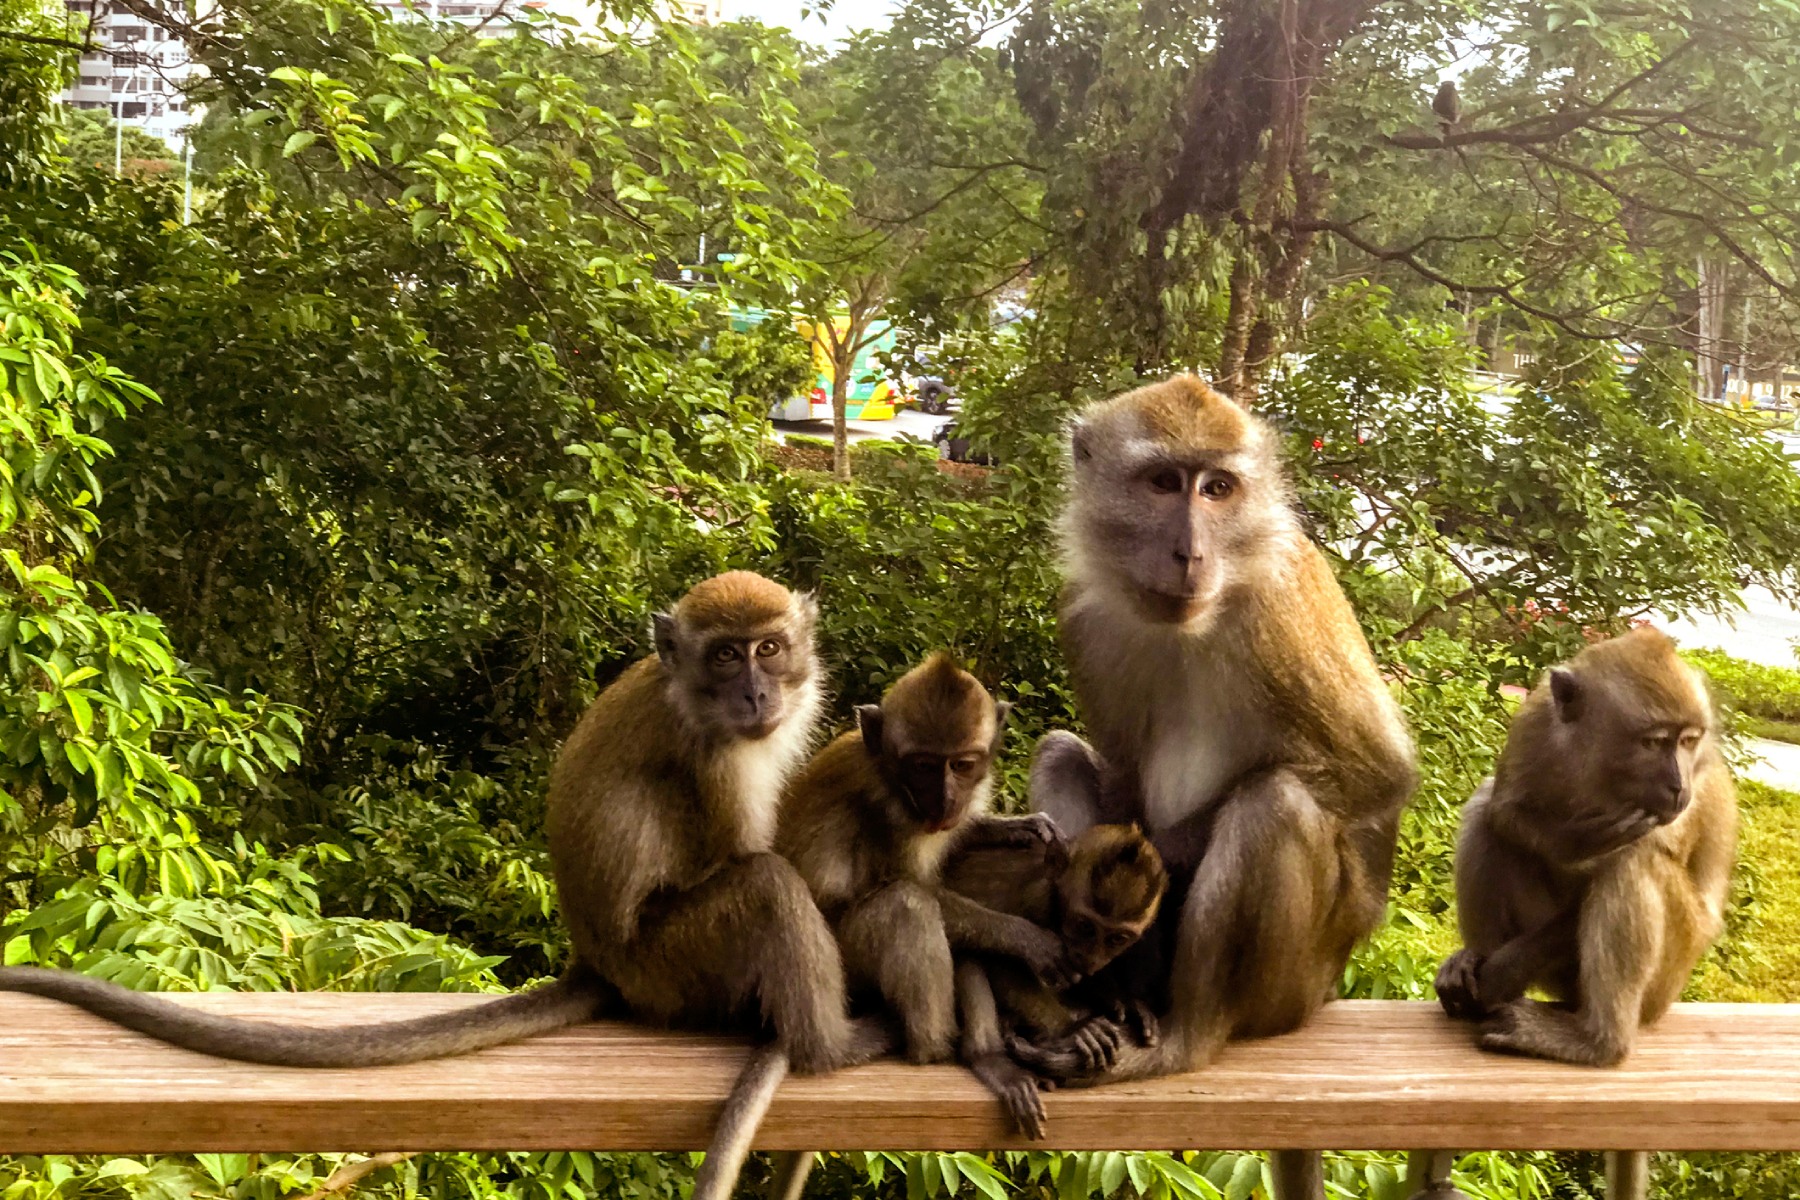 A family of long-tailed macaque monkey sitting on a wooden fence at Bukit Timah Nature Reserve